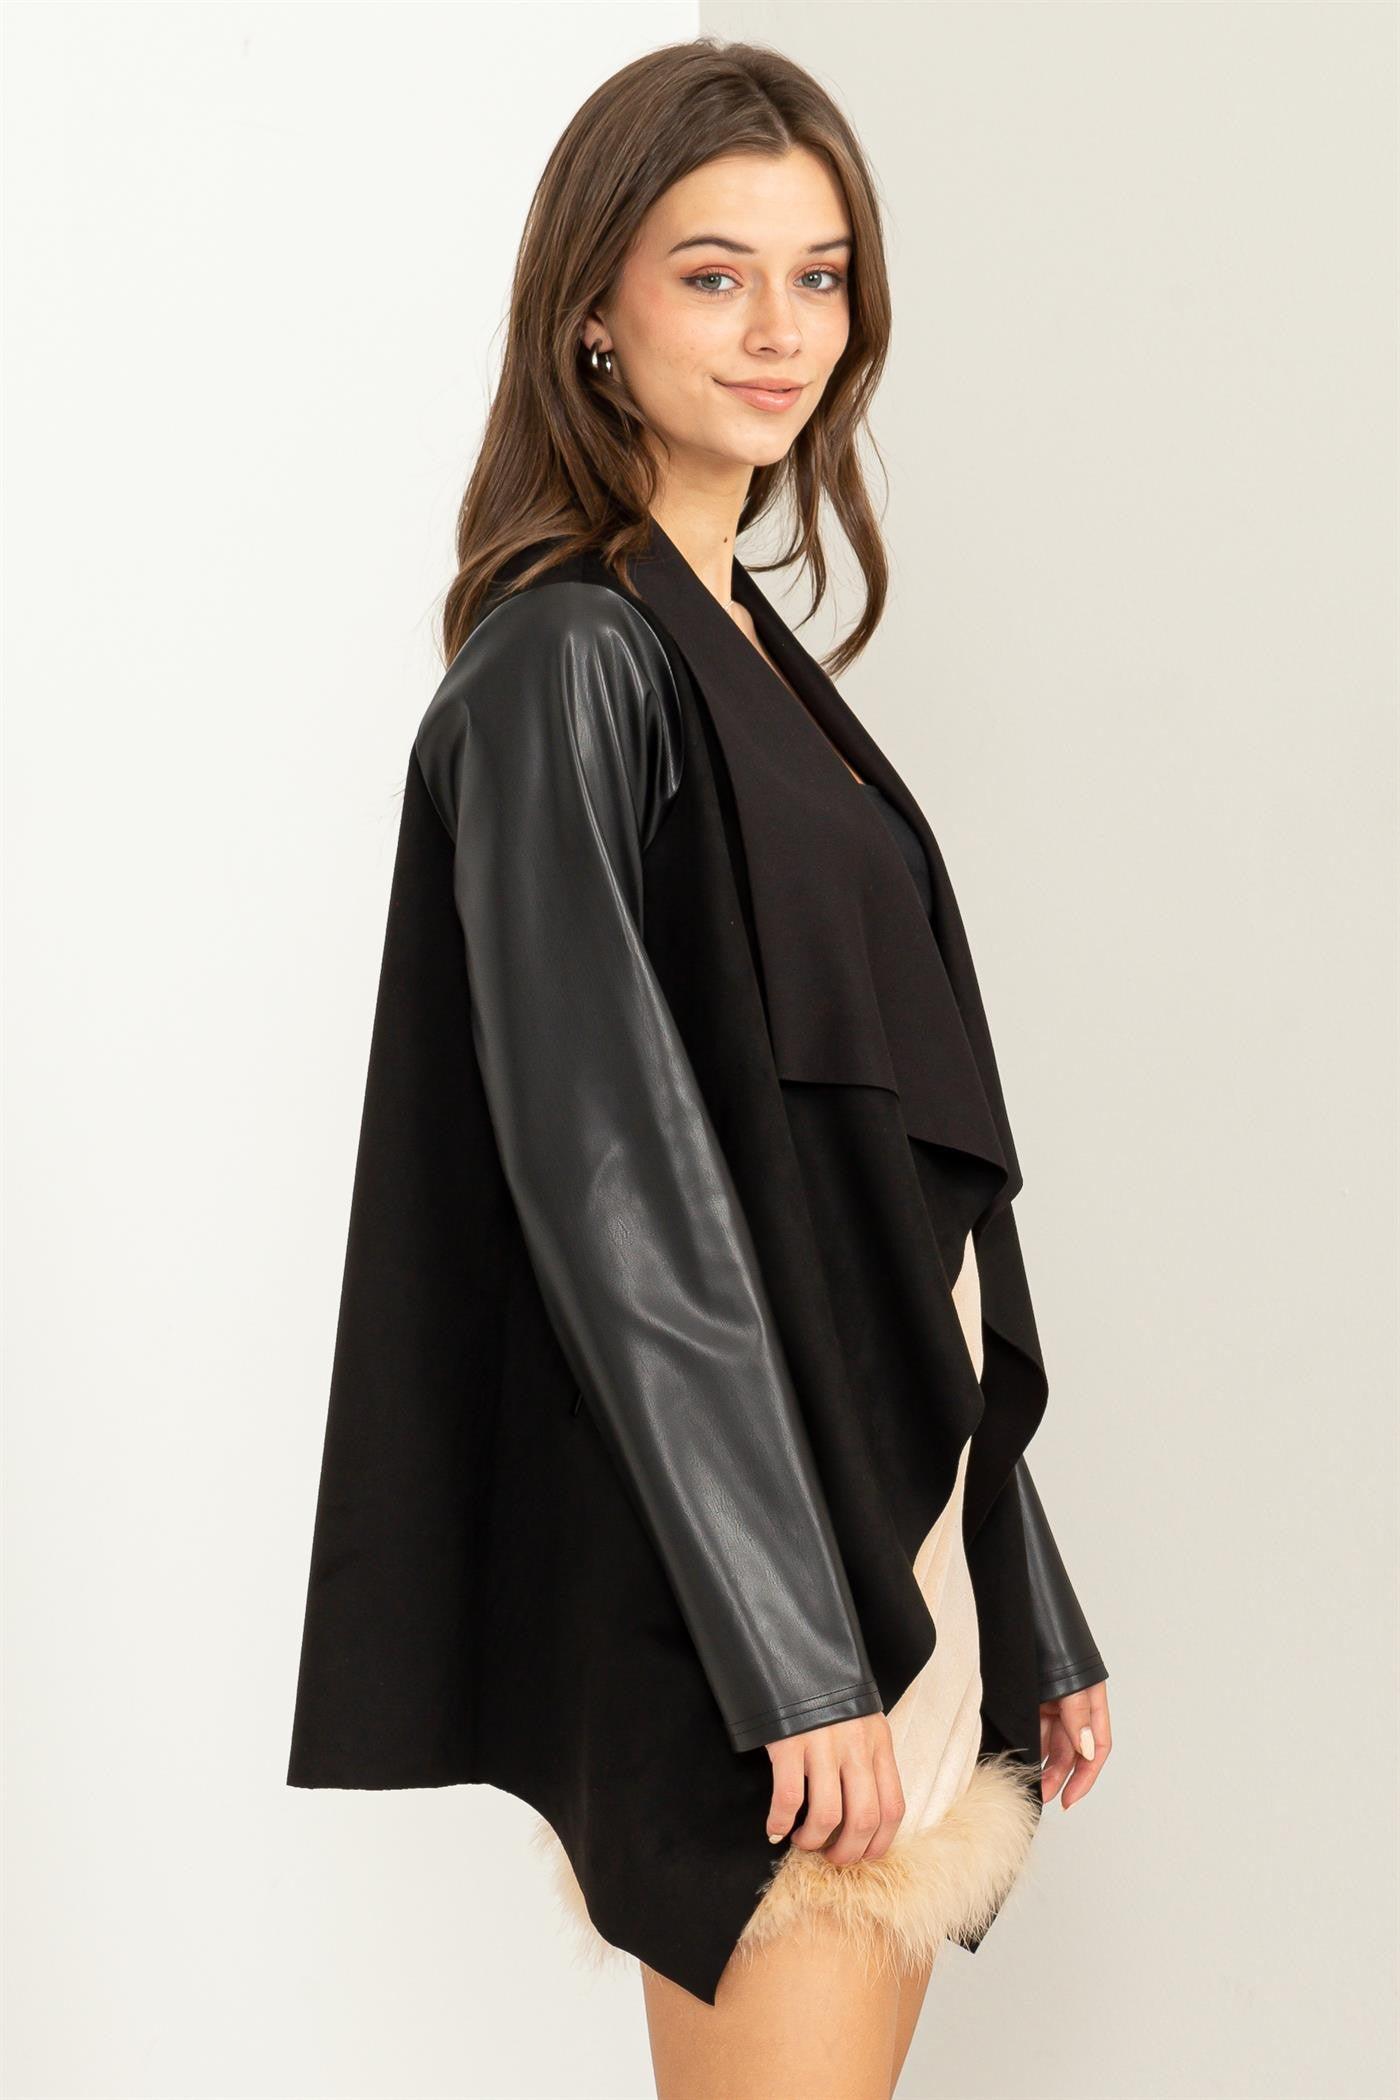 faux suede open jacket w/PU leather sleeves - RK Collections Boutique